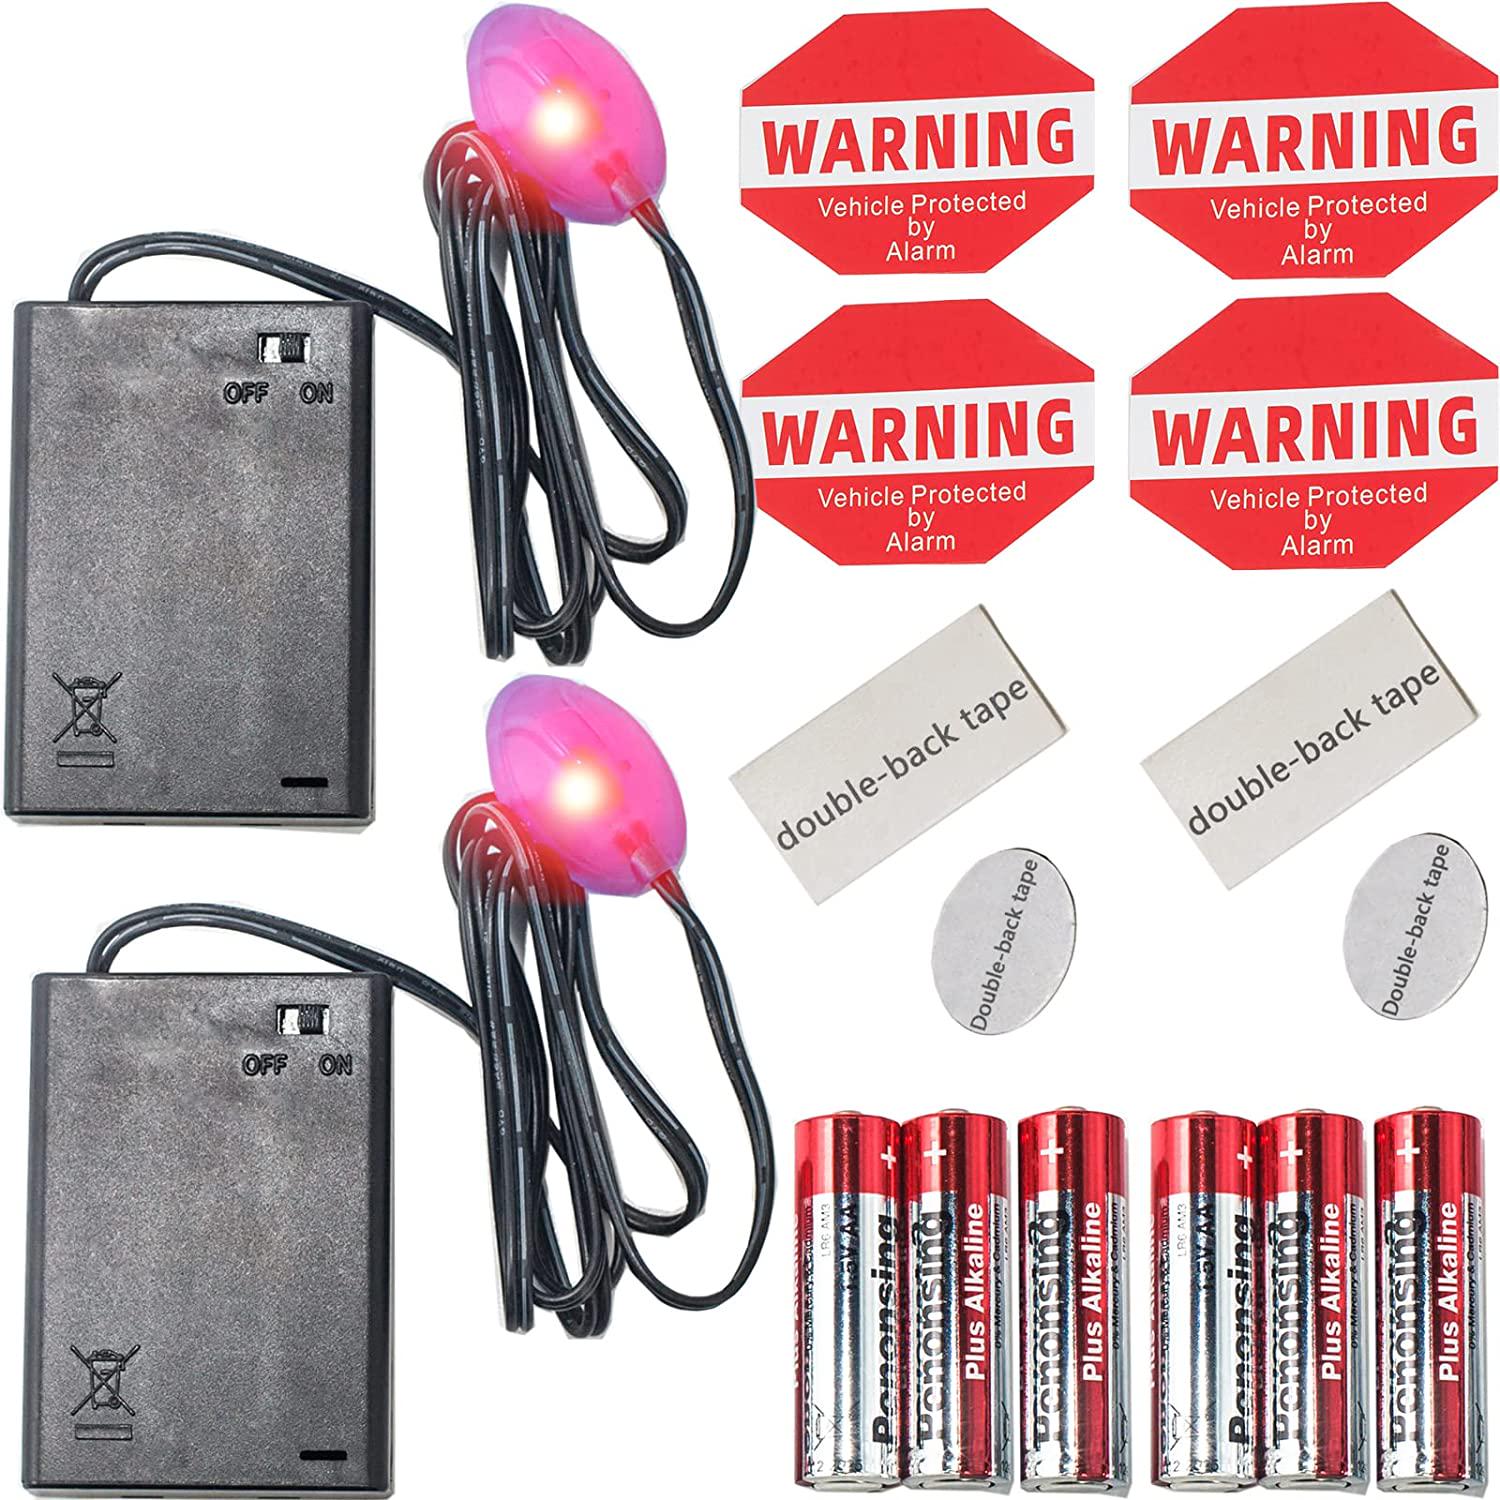 Extguds, Fake Car Alarm, Dummy Car Alarm,(Batteries Included) Red LED Light Simulate Imitation Security System, Warning Anti-Theft Flash Blinking Lamp (2Pack)